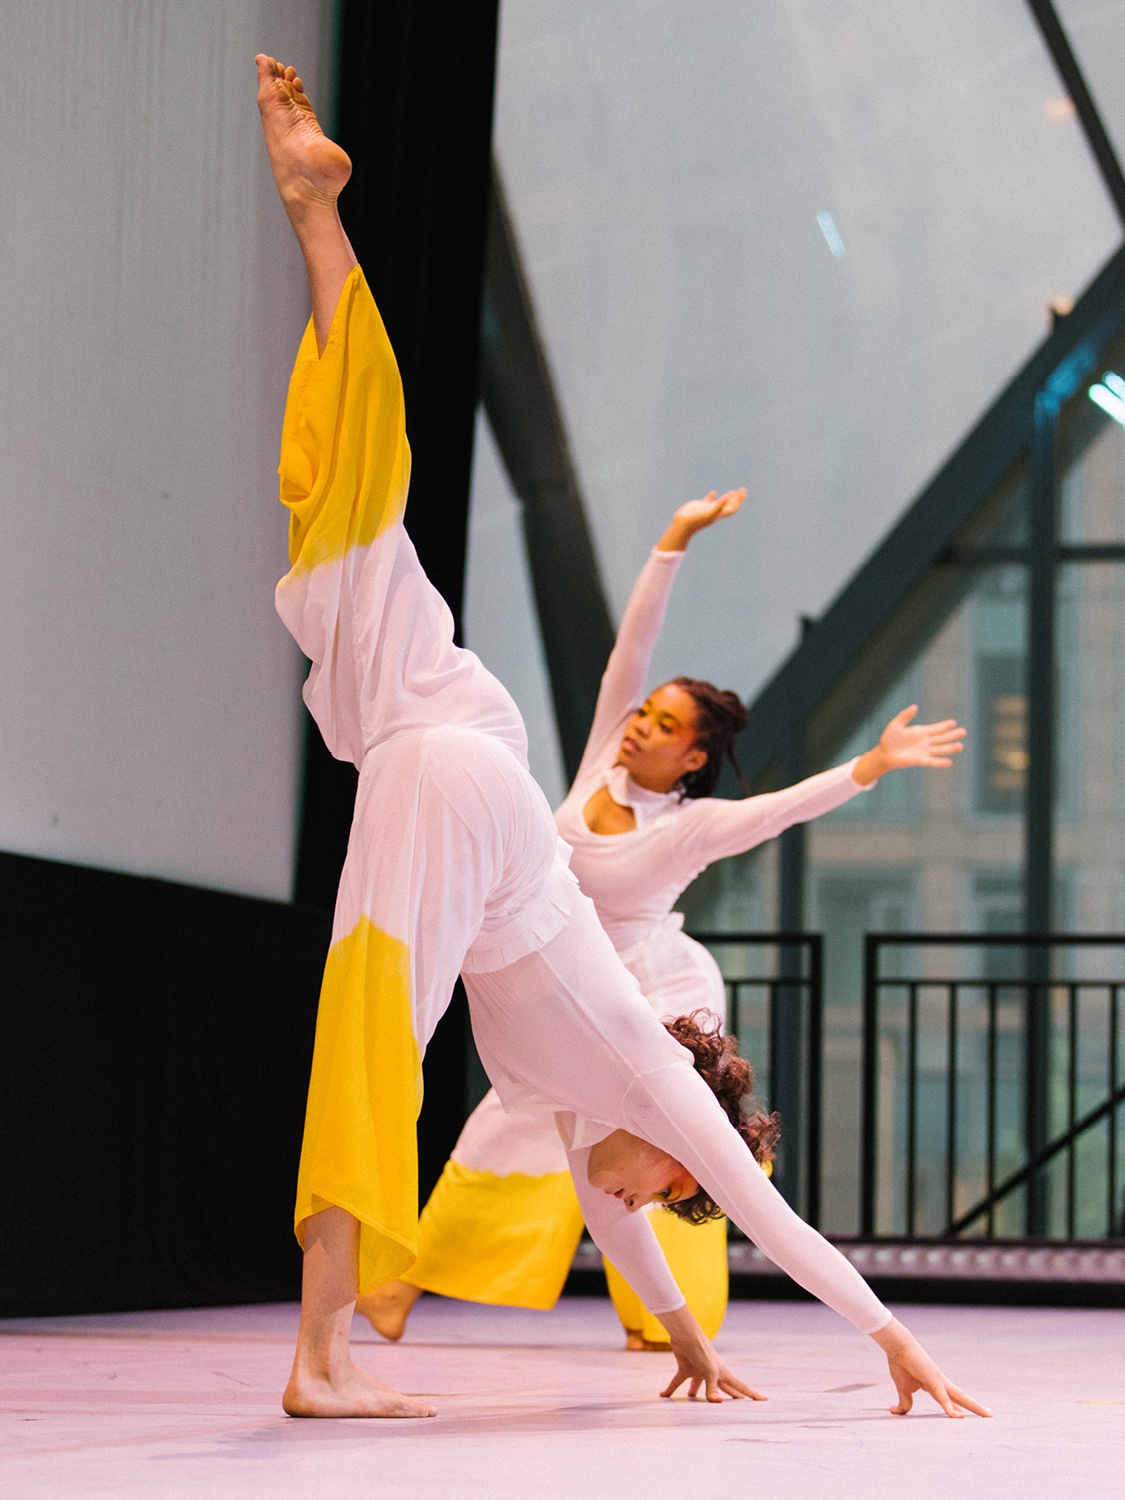 Two dancers on stage in white costumes with the pants dyed bright yellow. In the foreground one dancer bends over to touch the ground, lifting their left foot high into the air. In the background the second dancer extends both arms above their head.